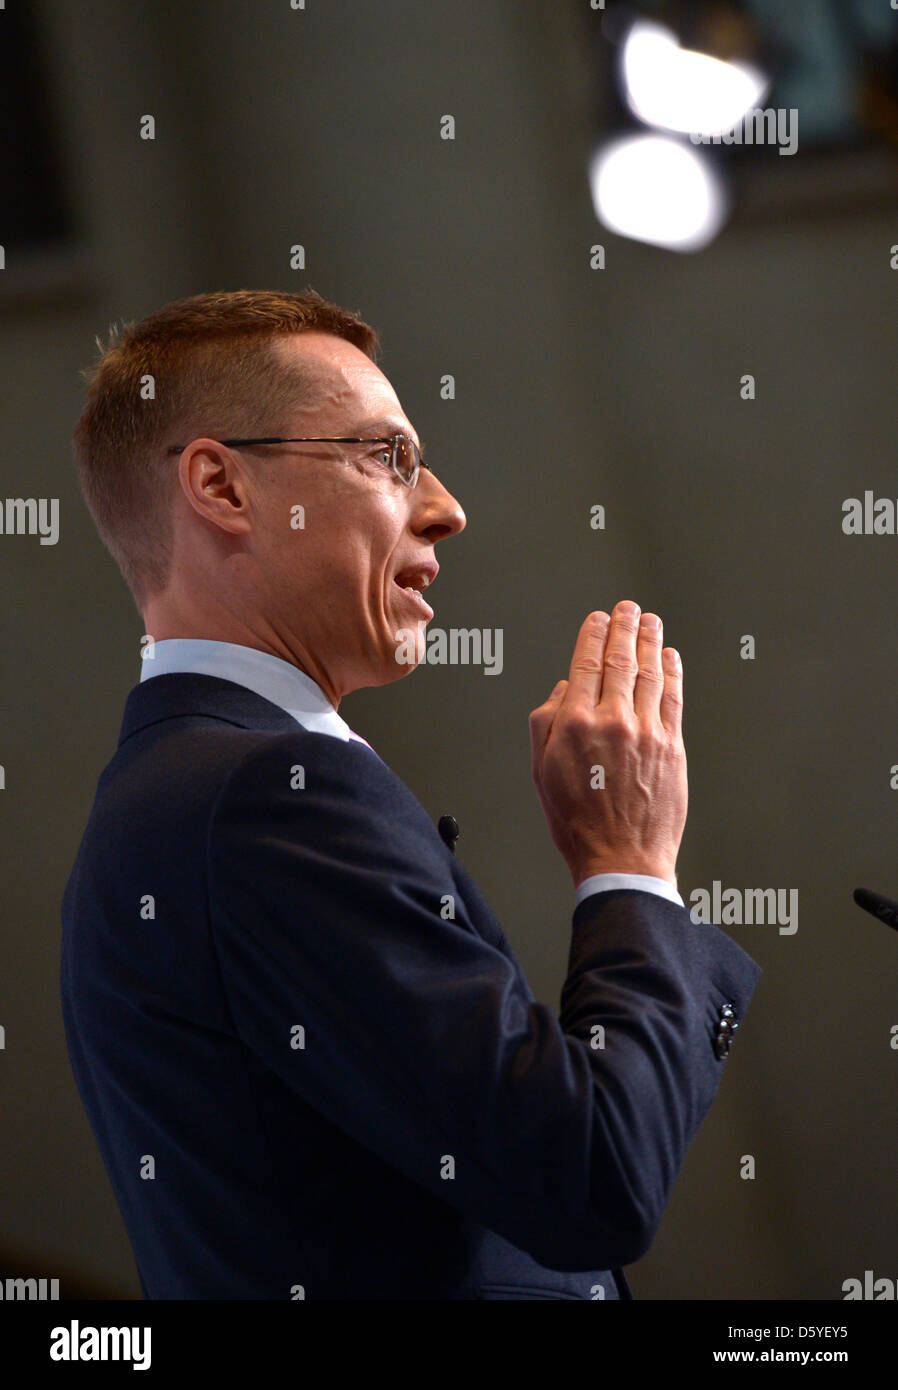 Finnish Minister for European Affairs and Foreign Trade Alexander Stubb delivers a speech during the 2nd Berlin Foreign Policy Forum in Berlin, Germany, 23 October 2012. The 2nd Berlin Foreign Policy Forum initiated by the Koerber Foundation focuses the future of Europe. Photo: RAINER JENSEN Stock Photo